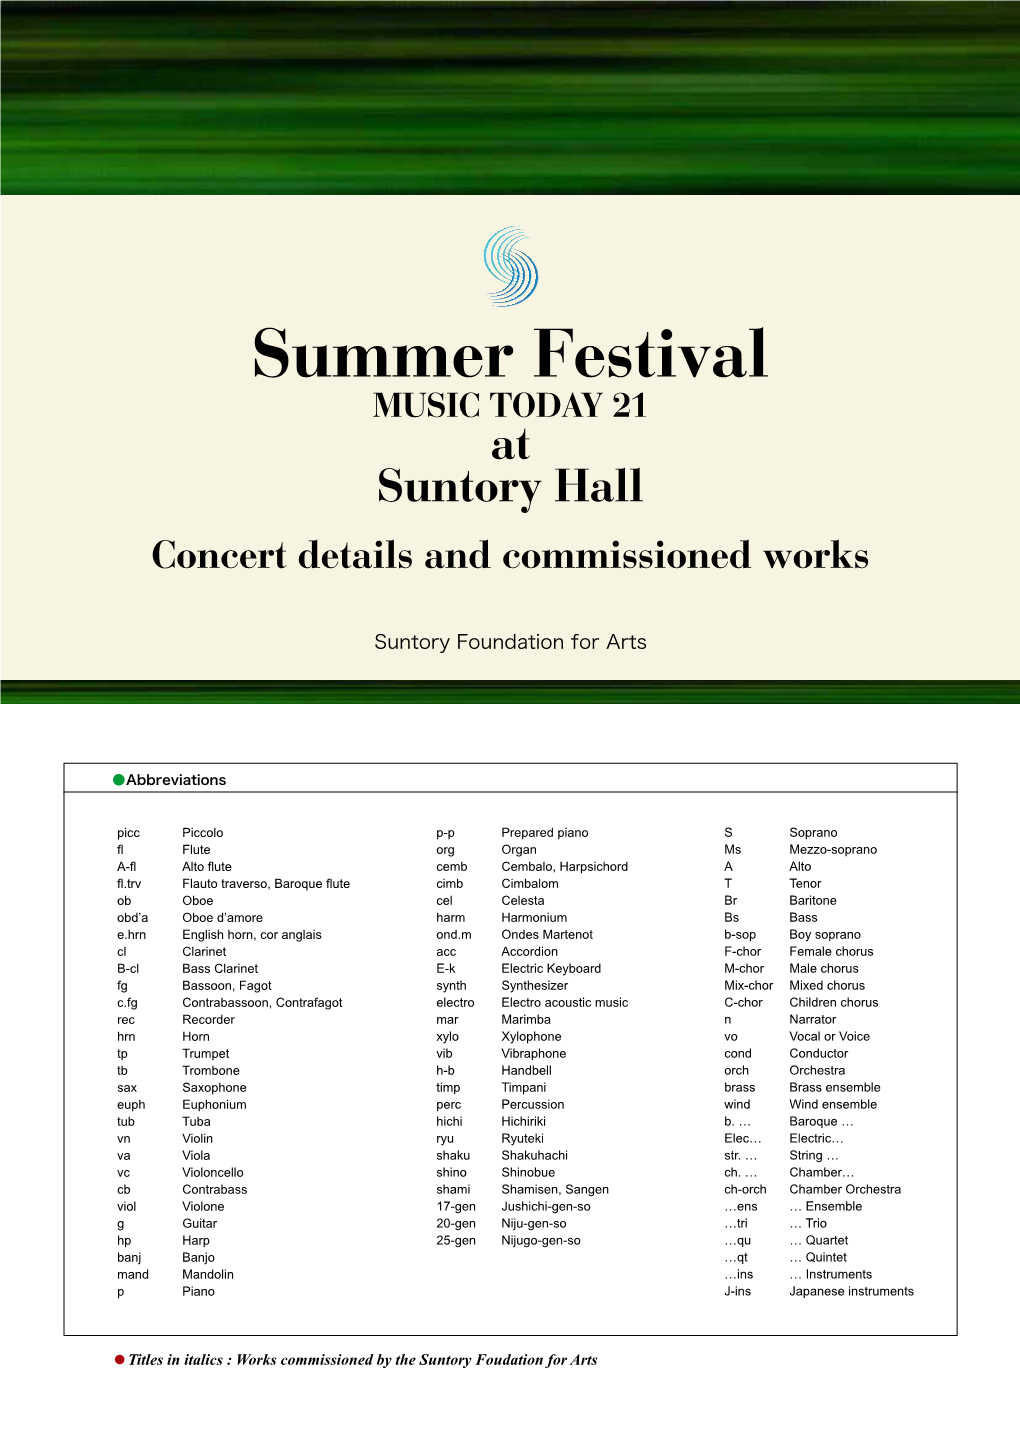 Summer Festival MUSIC TODAY 21 at Suntory Hall Concert Details and Commissioned Works